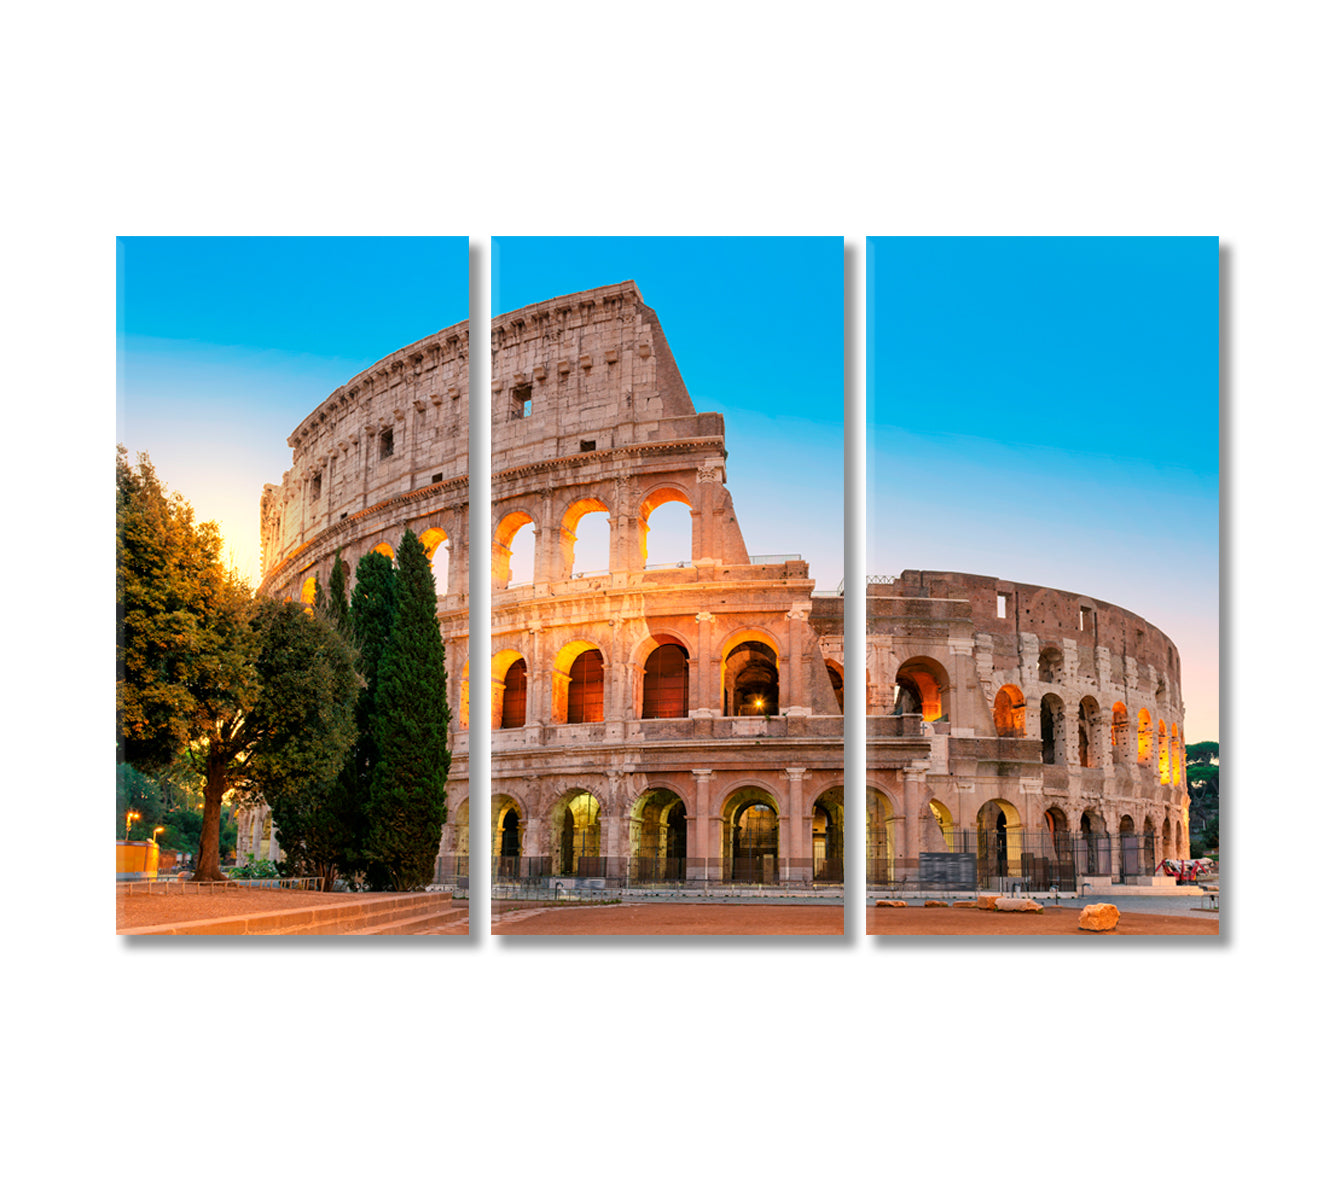 Famous Colosseum in Rome Italy Canvas Print-Canvas Print-CetArt-3 Panels-36x24 inches-CetArt